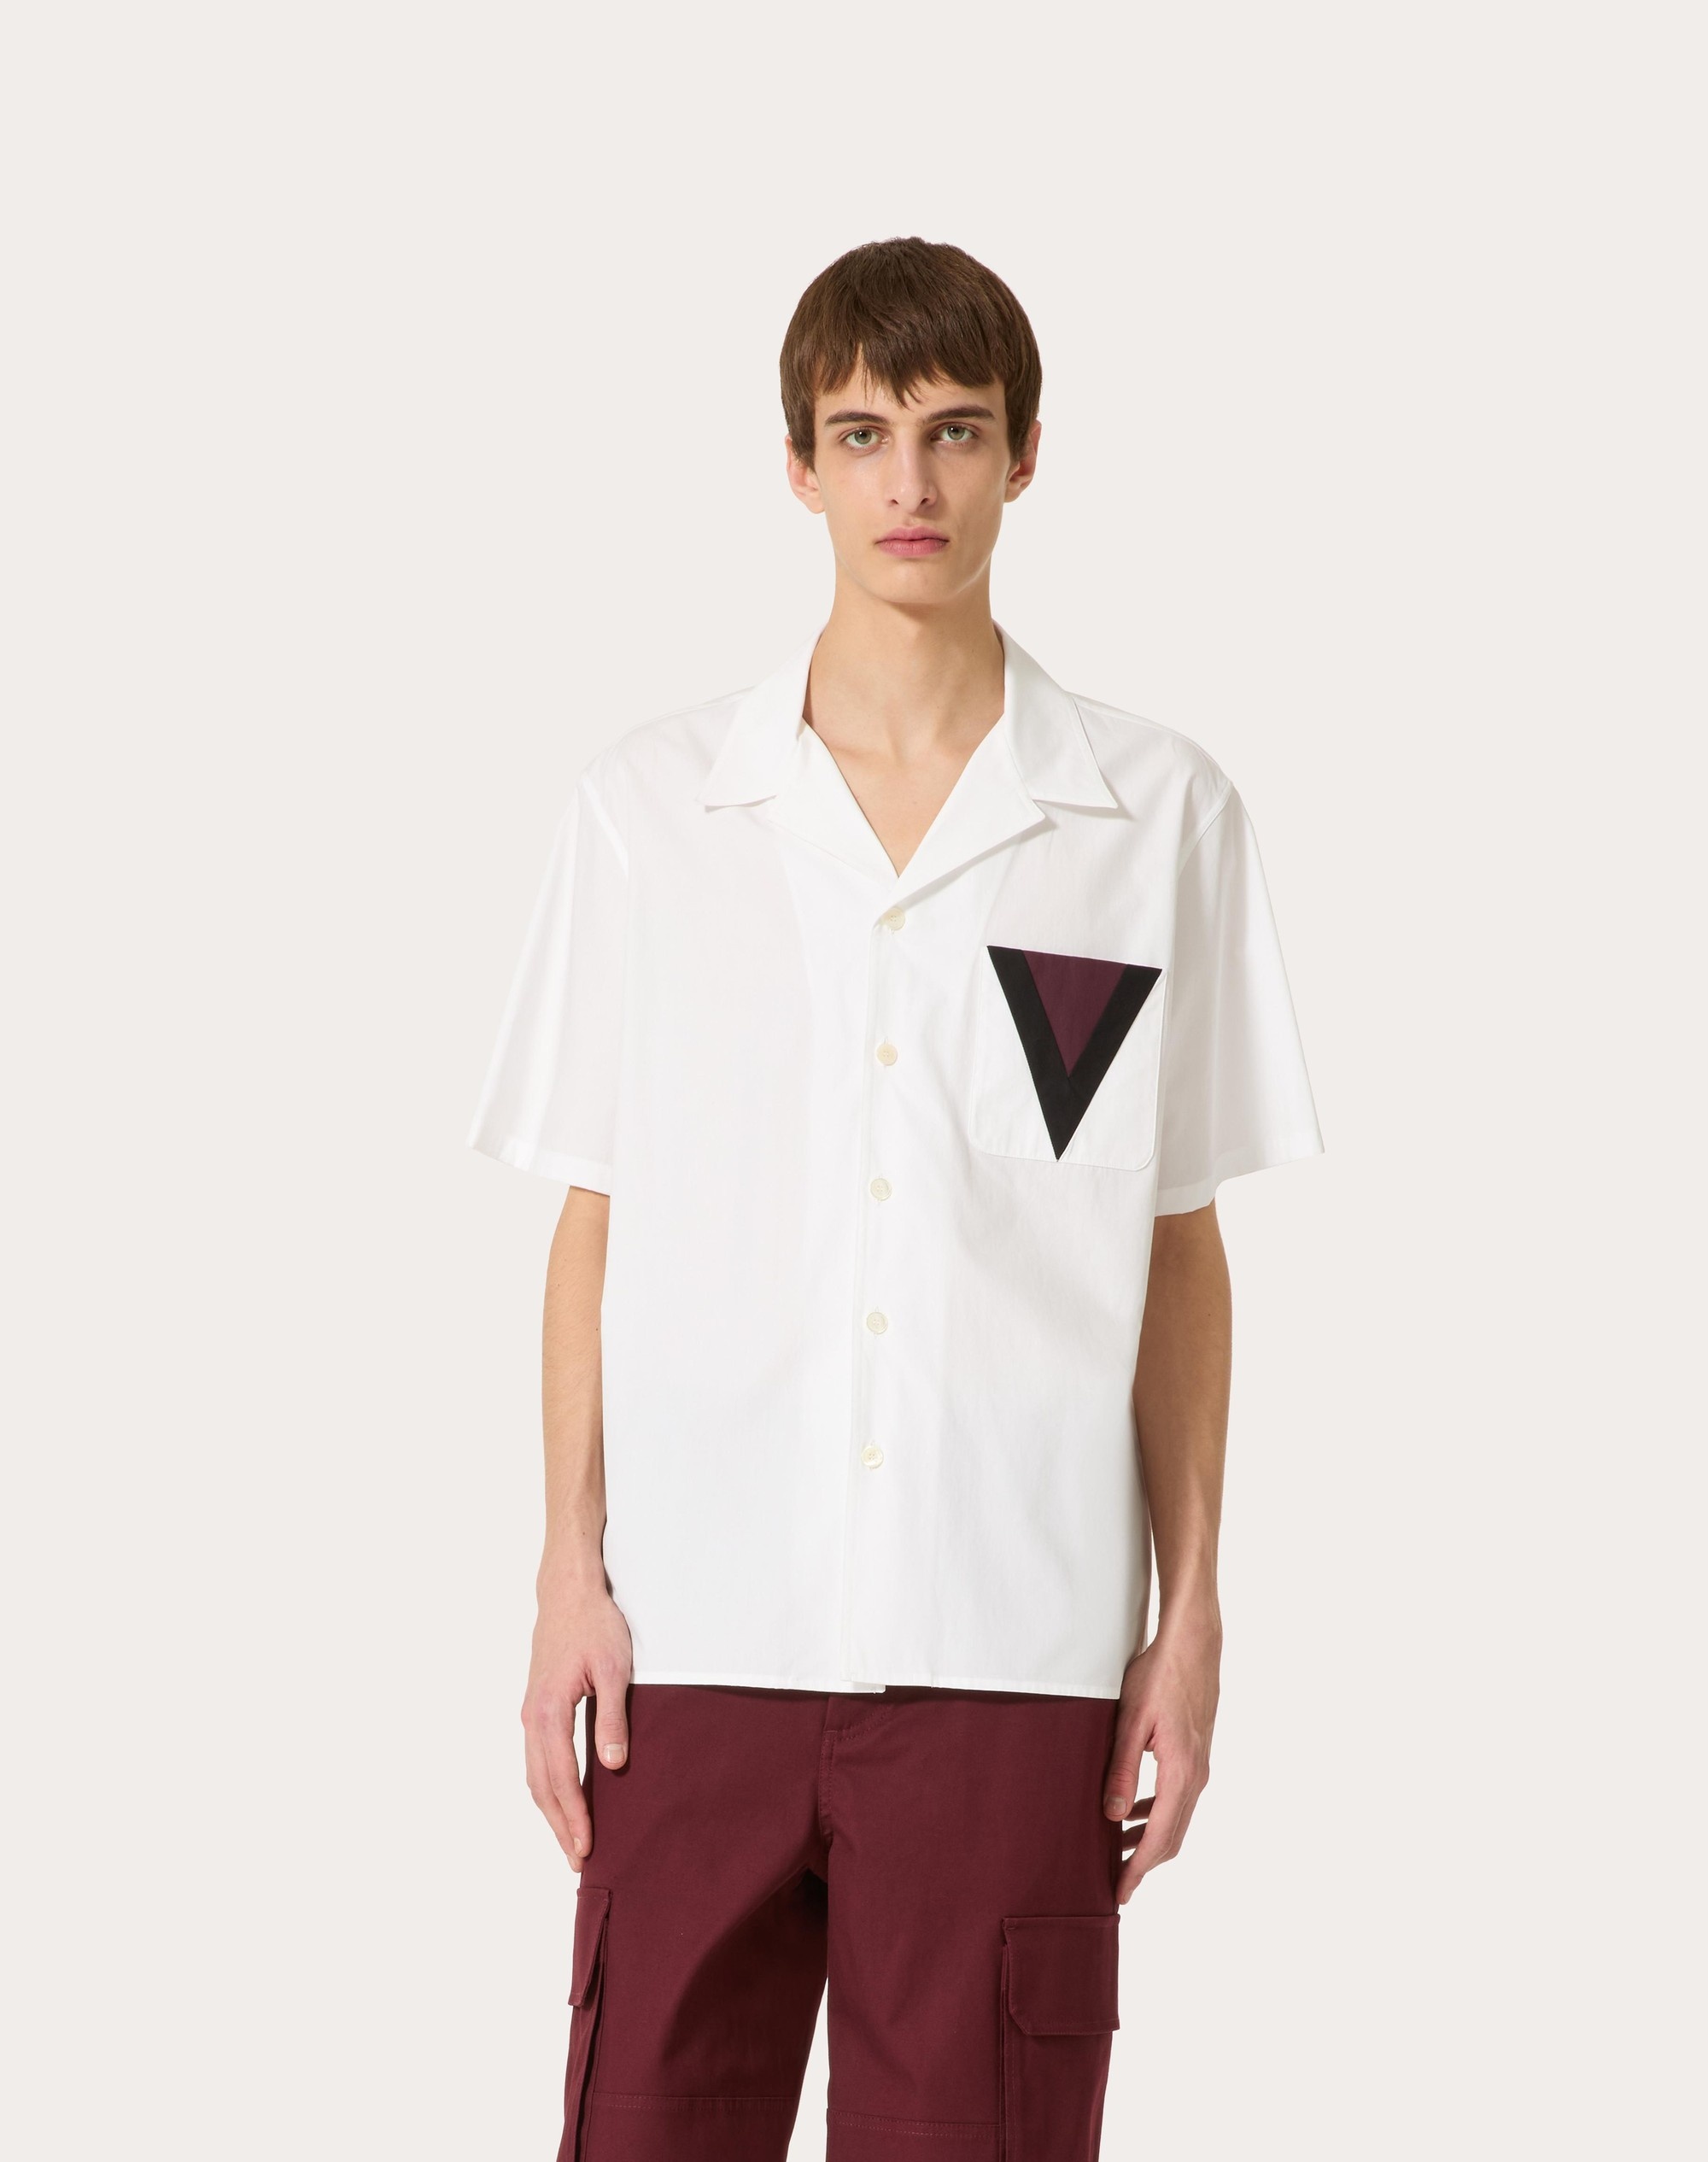 COTTON BOWLING SHIRT WITH INLAID V DETAIL - 3